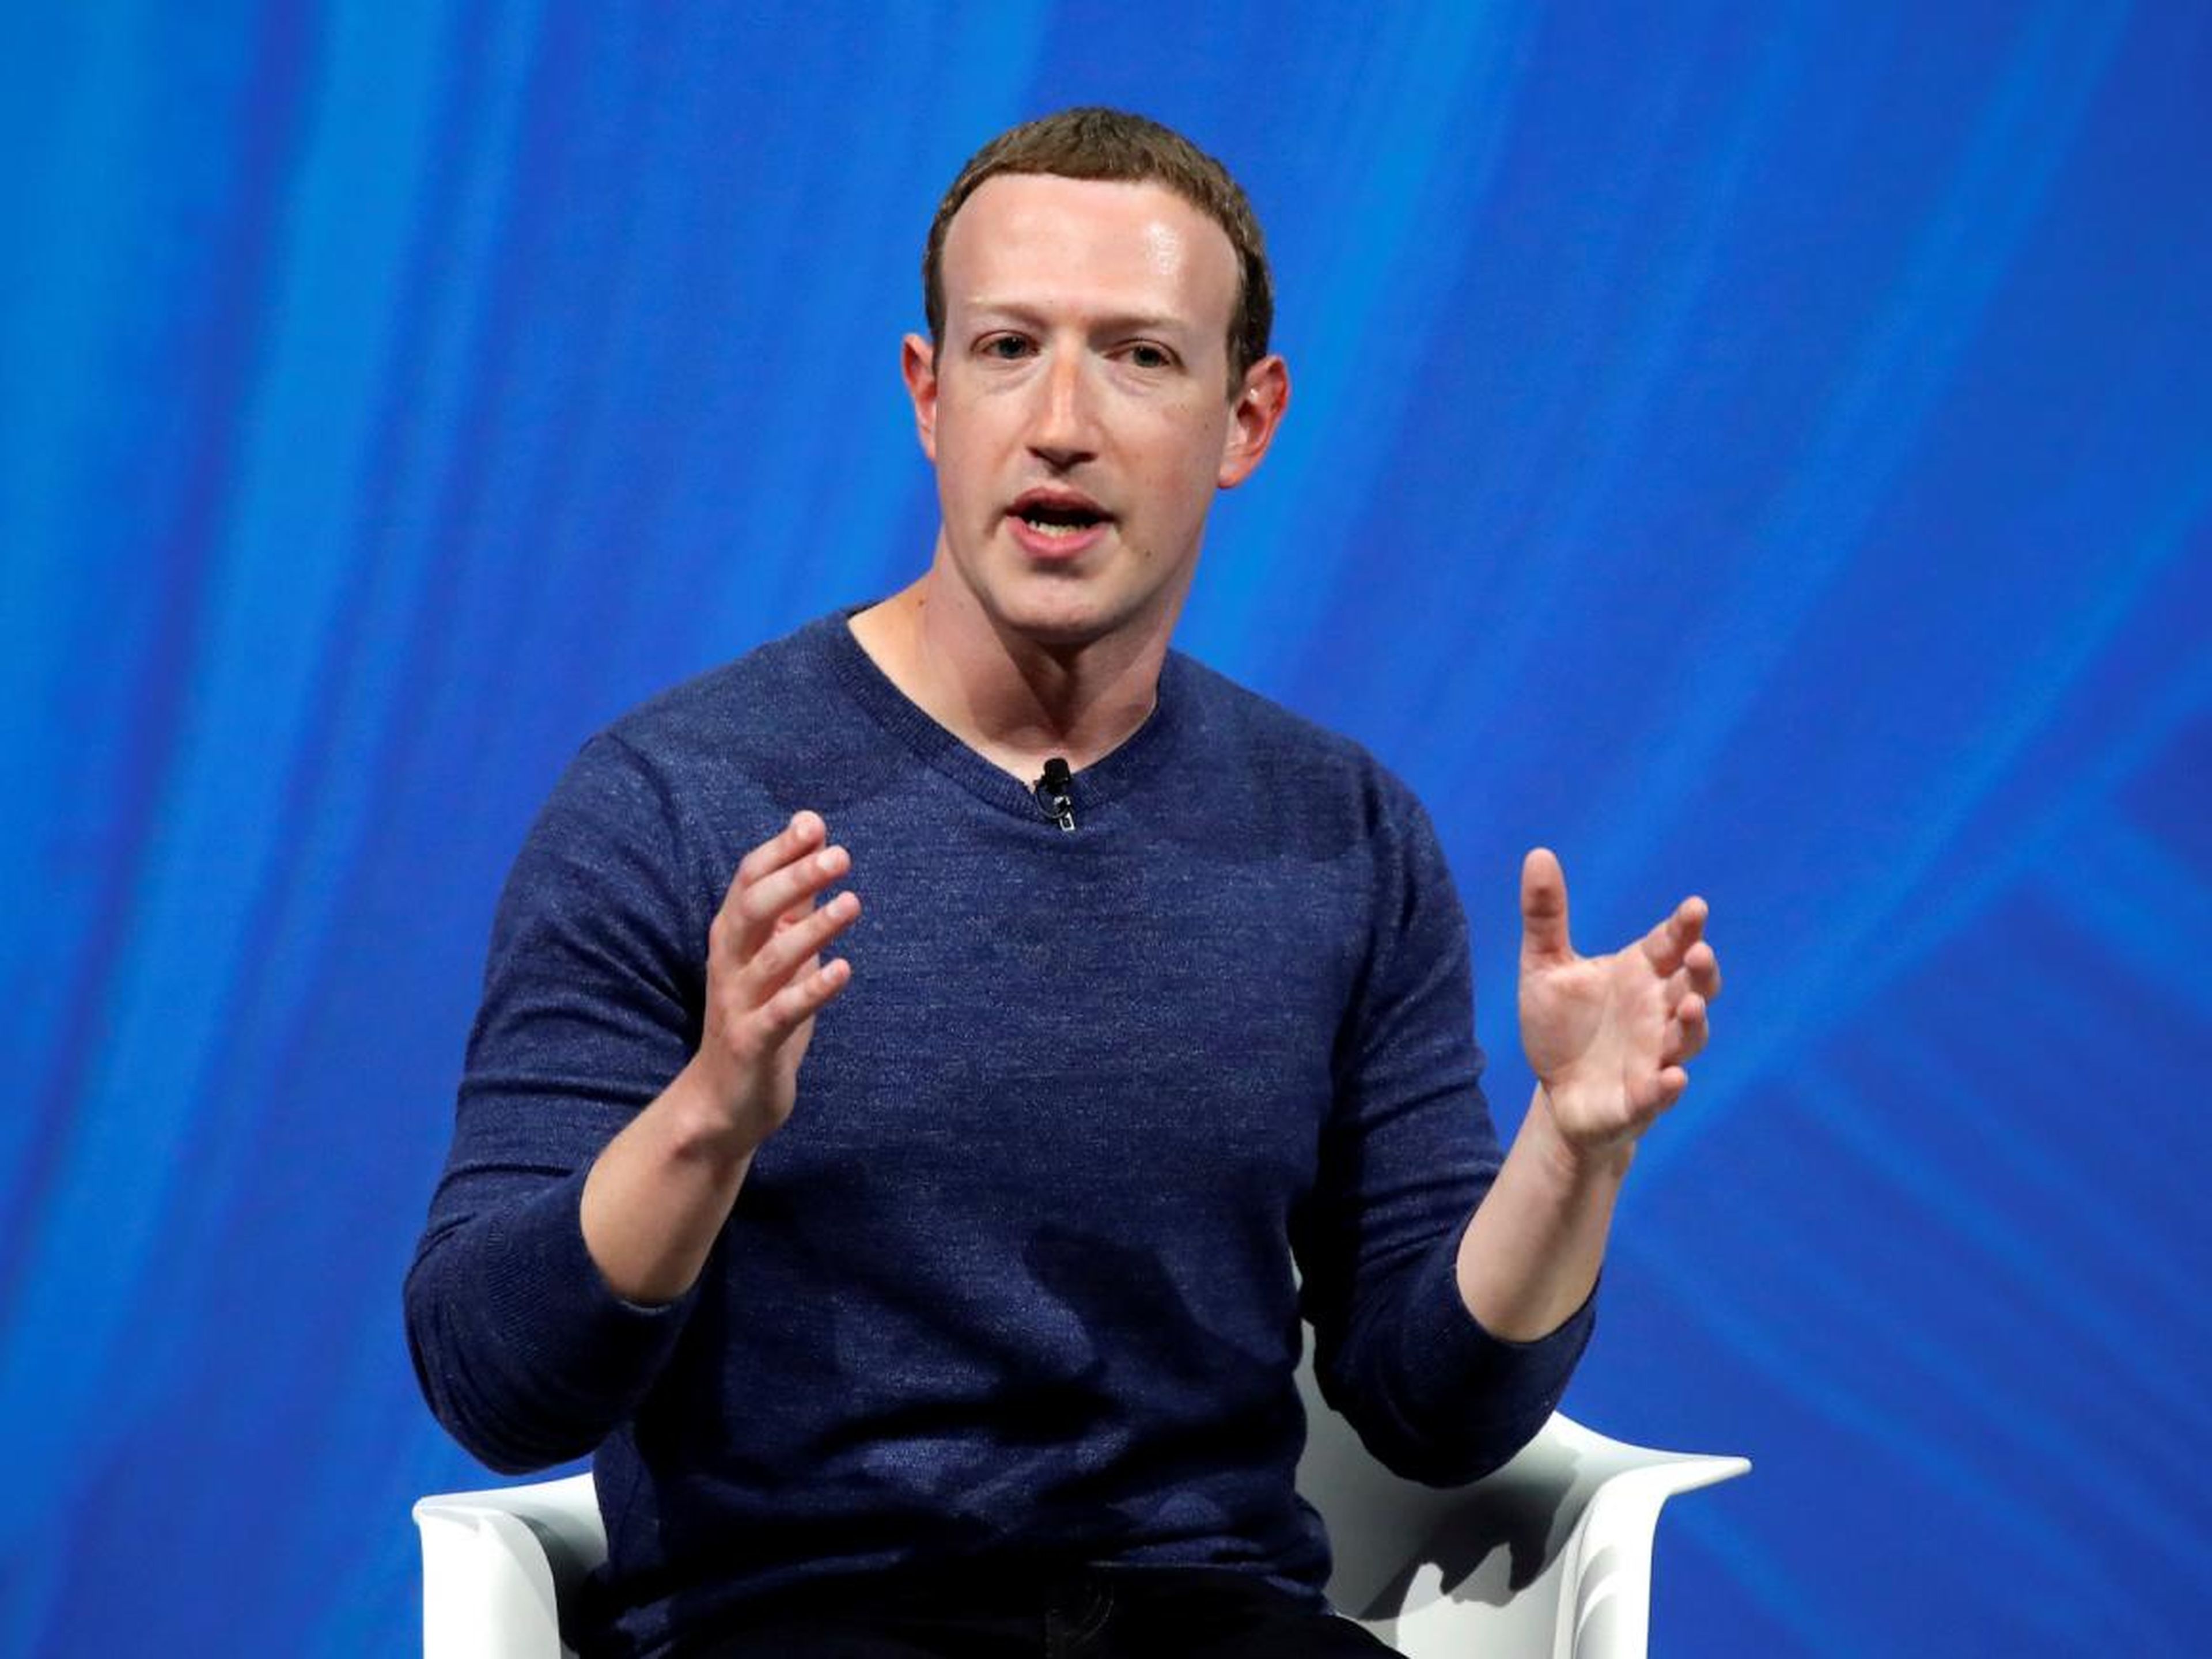 There's a fake video showing Mark Zuckerberg saying he's in control of 'billions of people's stolen data,' as Facebook grapples with doctored videos that spread misinformation